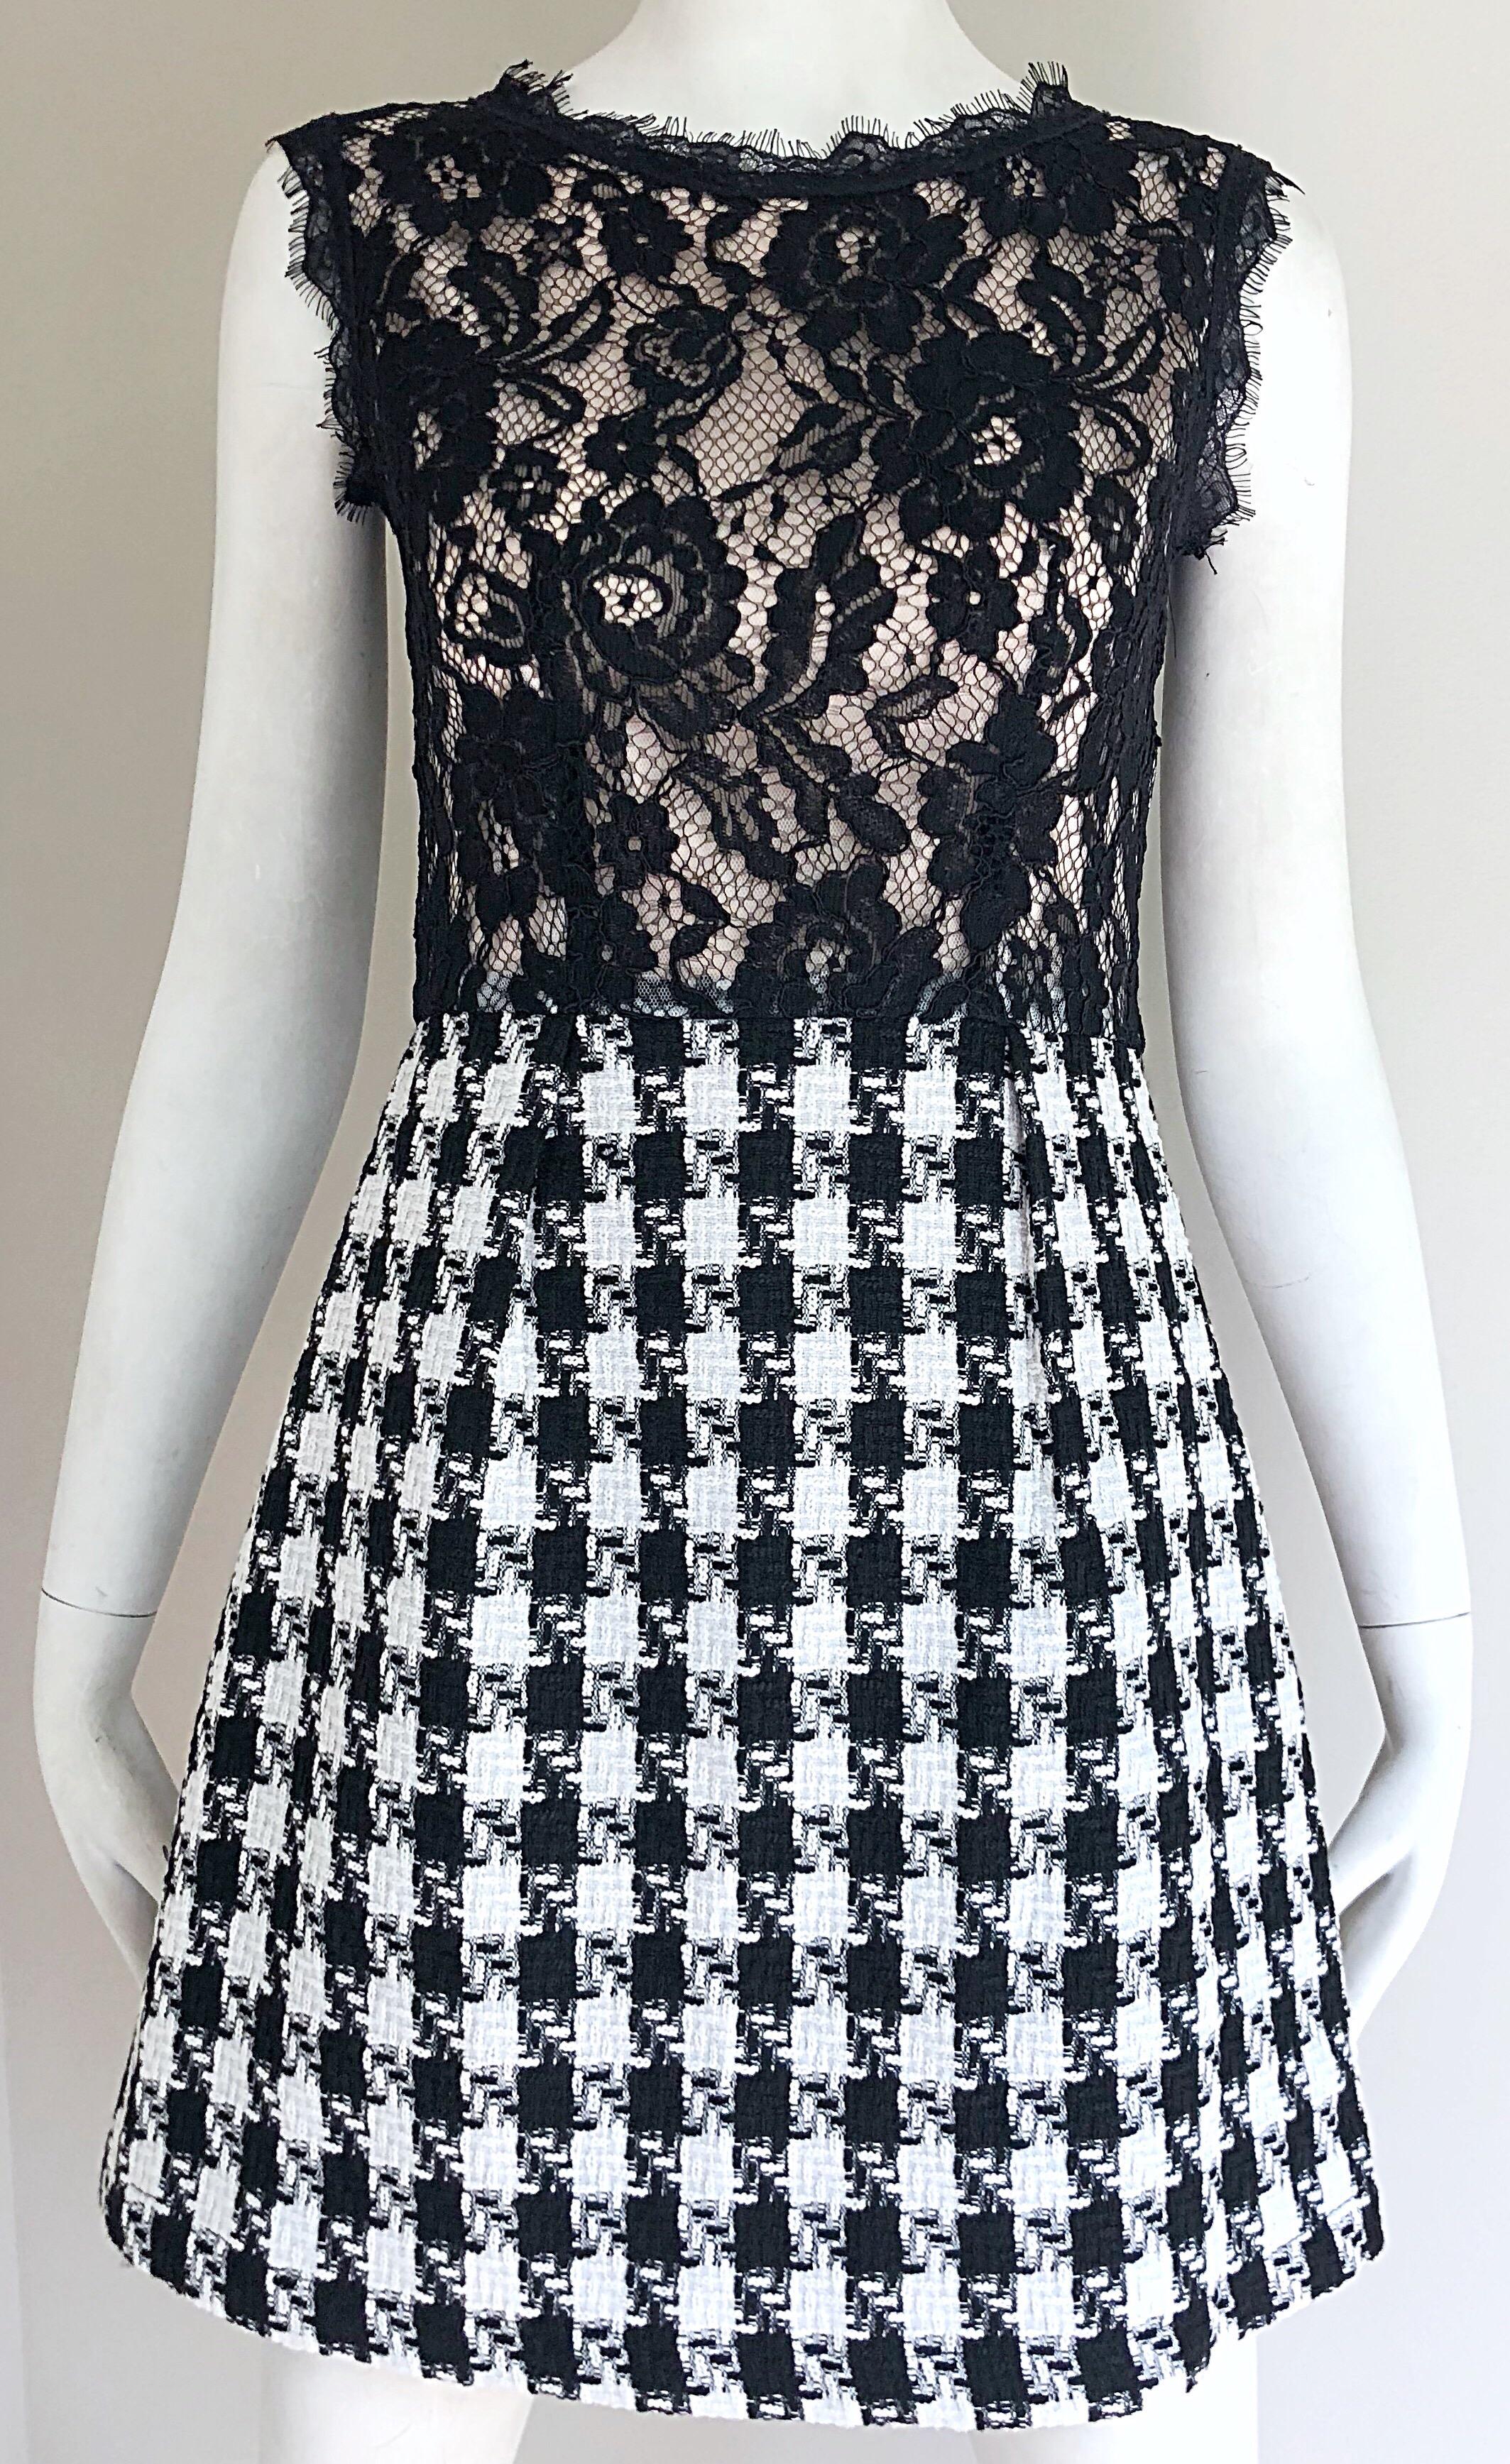 Marc Jacobs Early 2000s Black and White Lace Houndstooth Checkered Mini Dress For Sale 3